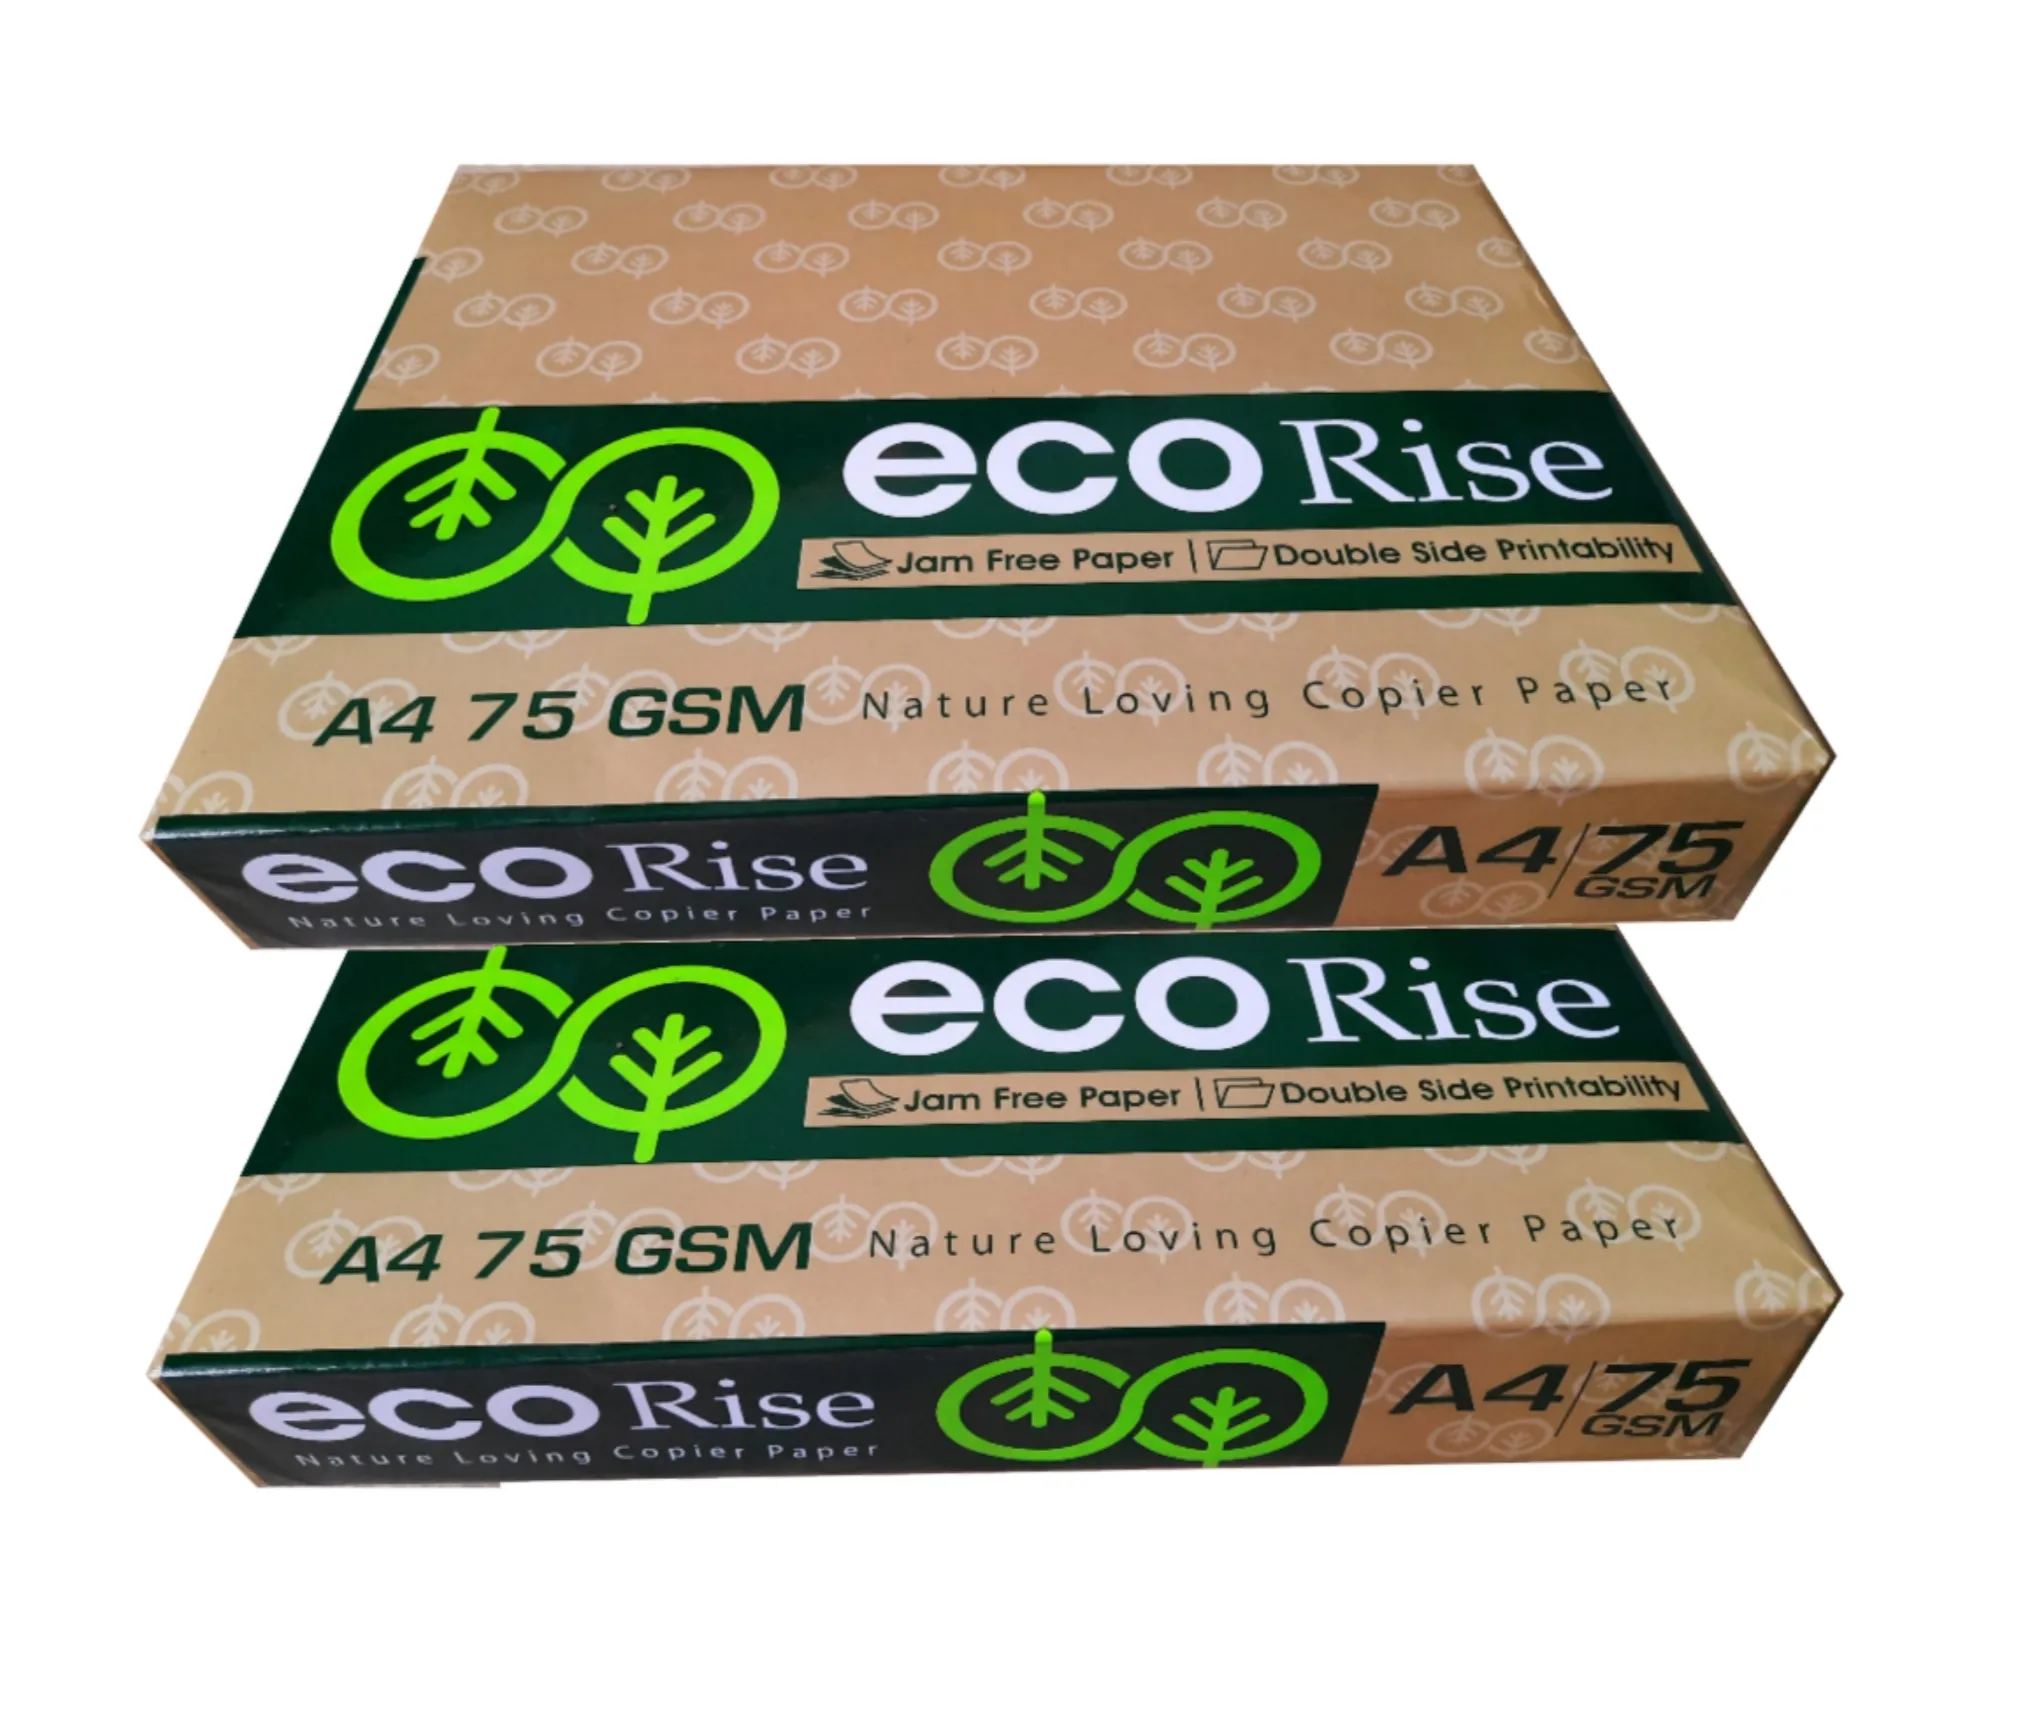 Eco Rise Printing Copy A4 Size JK Paper Eco Tree Friendly 75 GSM 500 Sheet Pack of 2